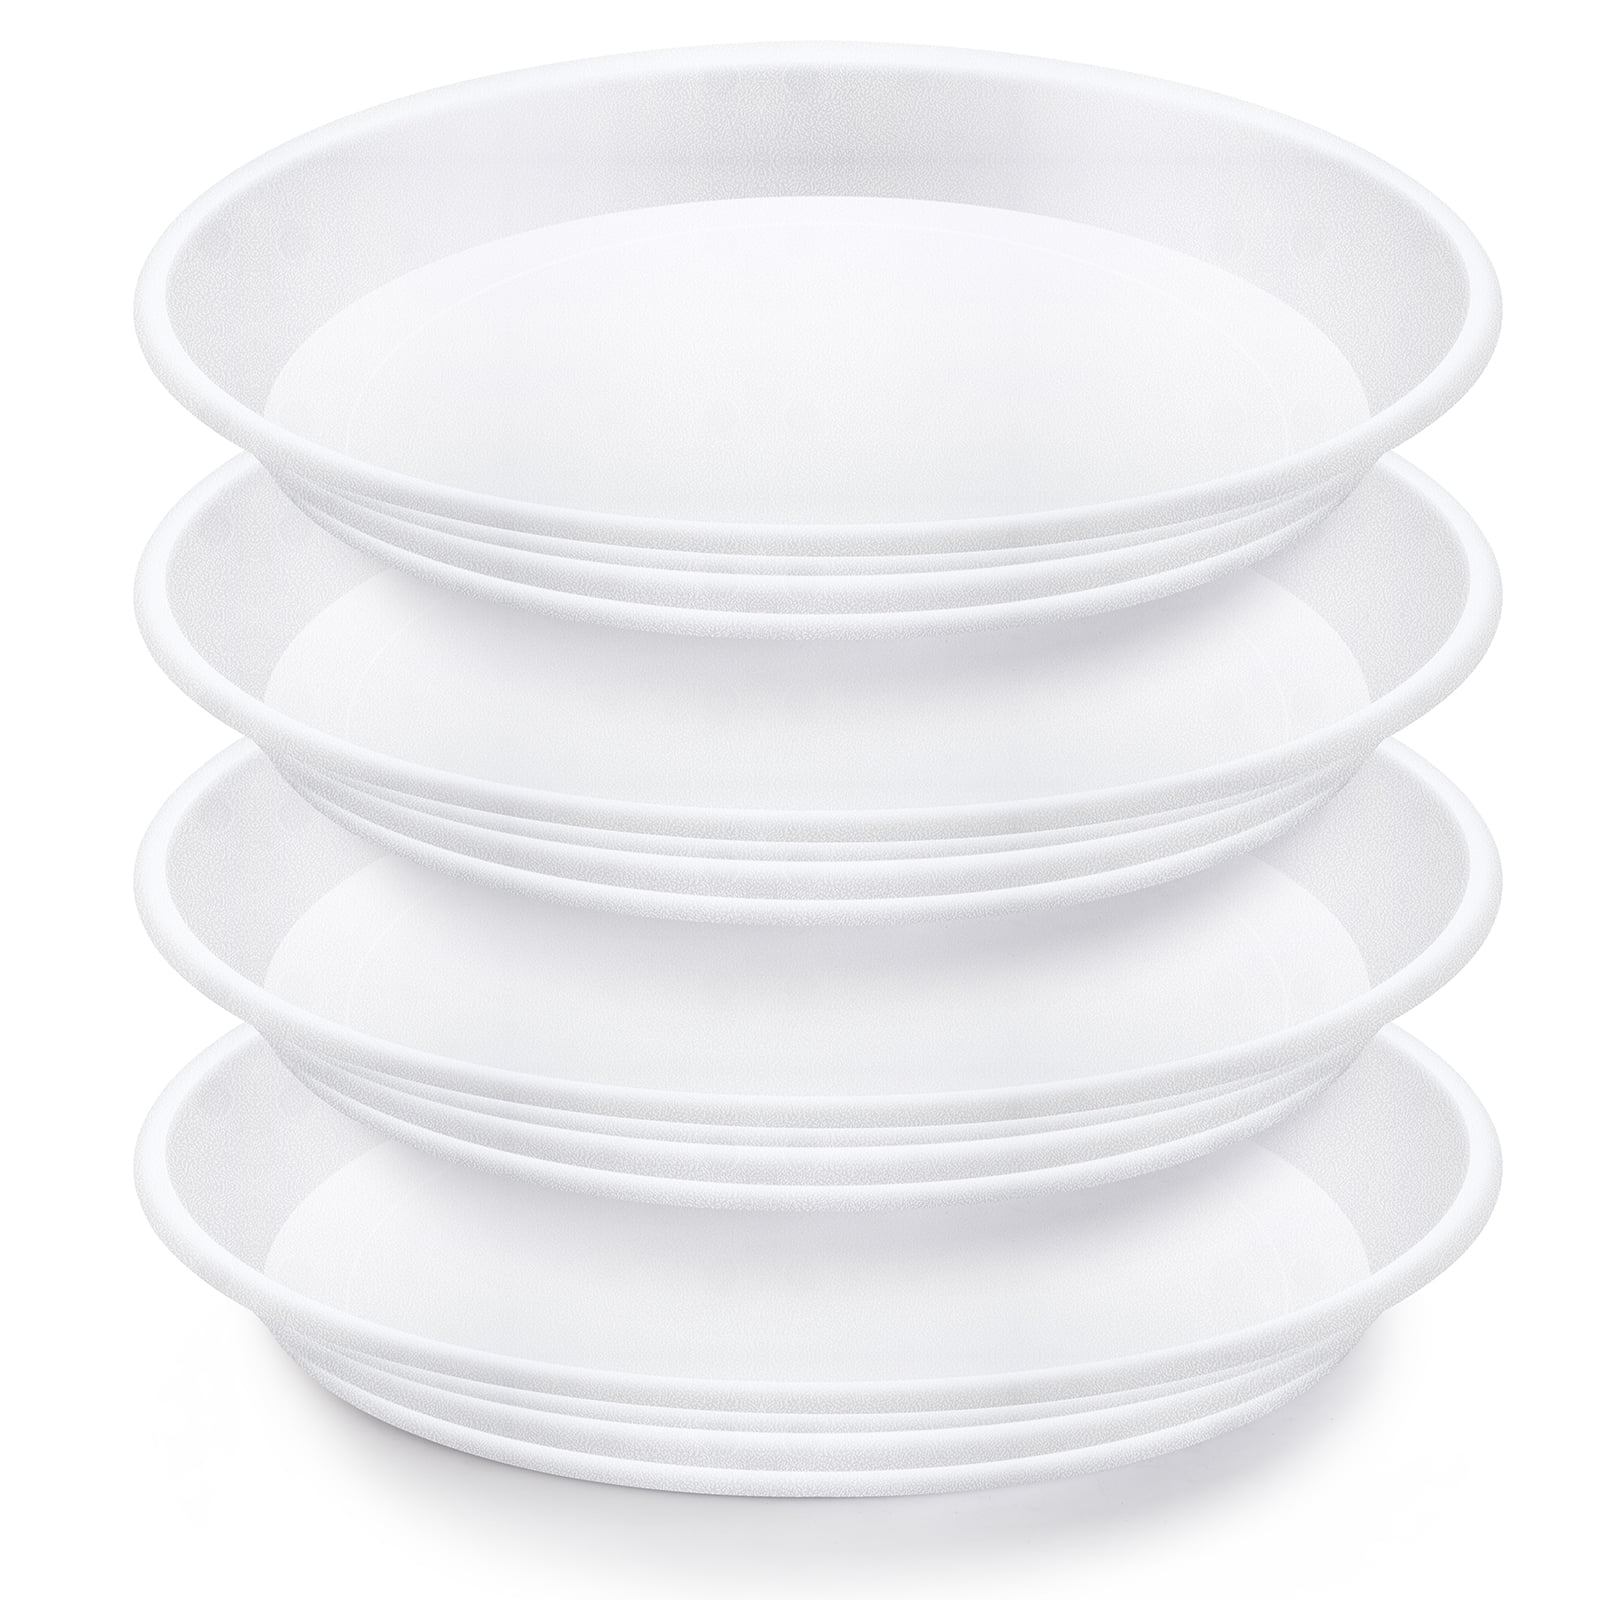 Plant Saucer 4 " Diameter Resin Clear Case of 50 